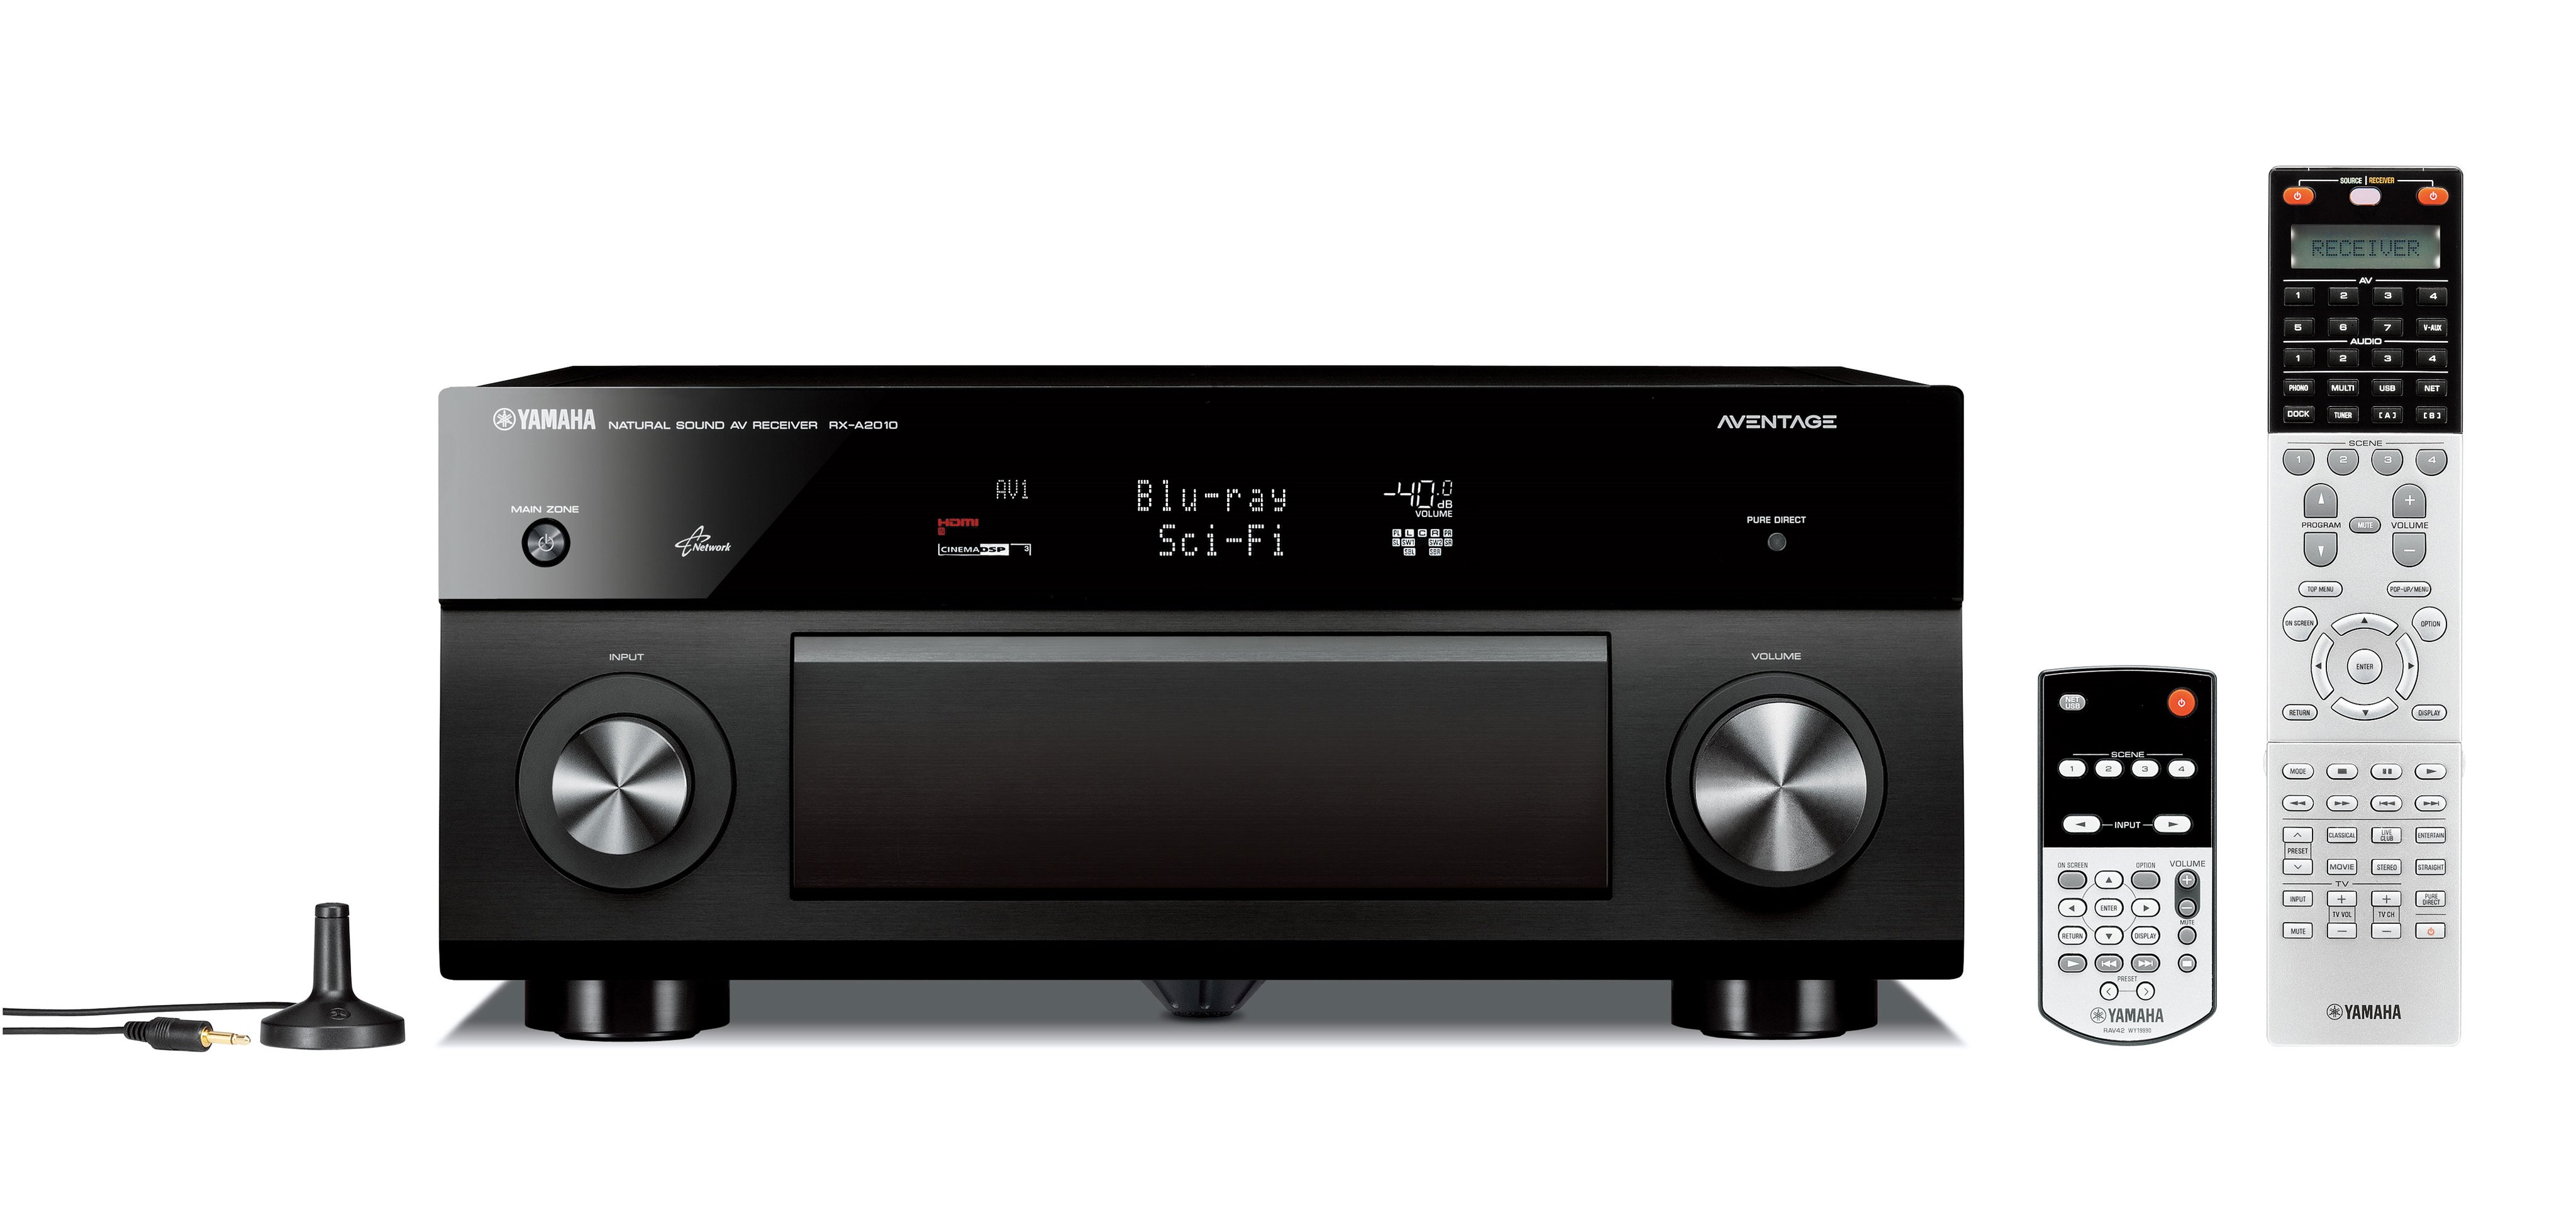 Rx 010 Overview Av Receivers Audio Visual Products Yamaha Other European Countries